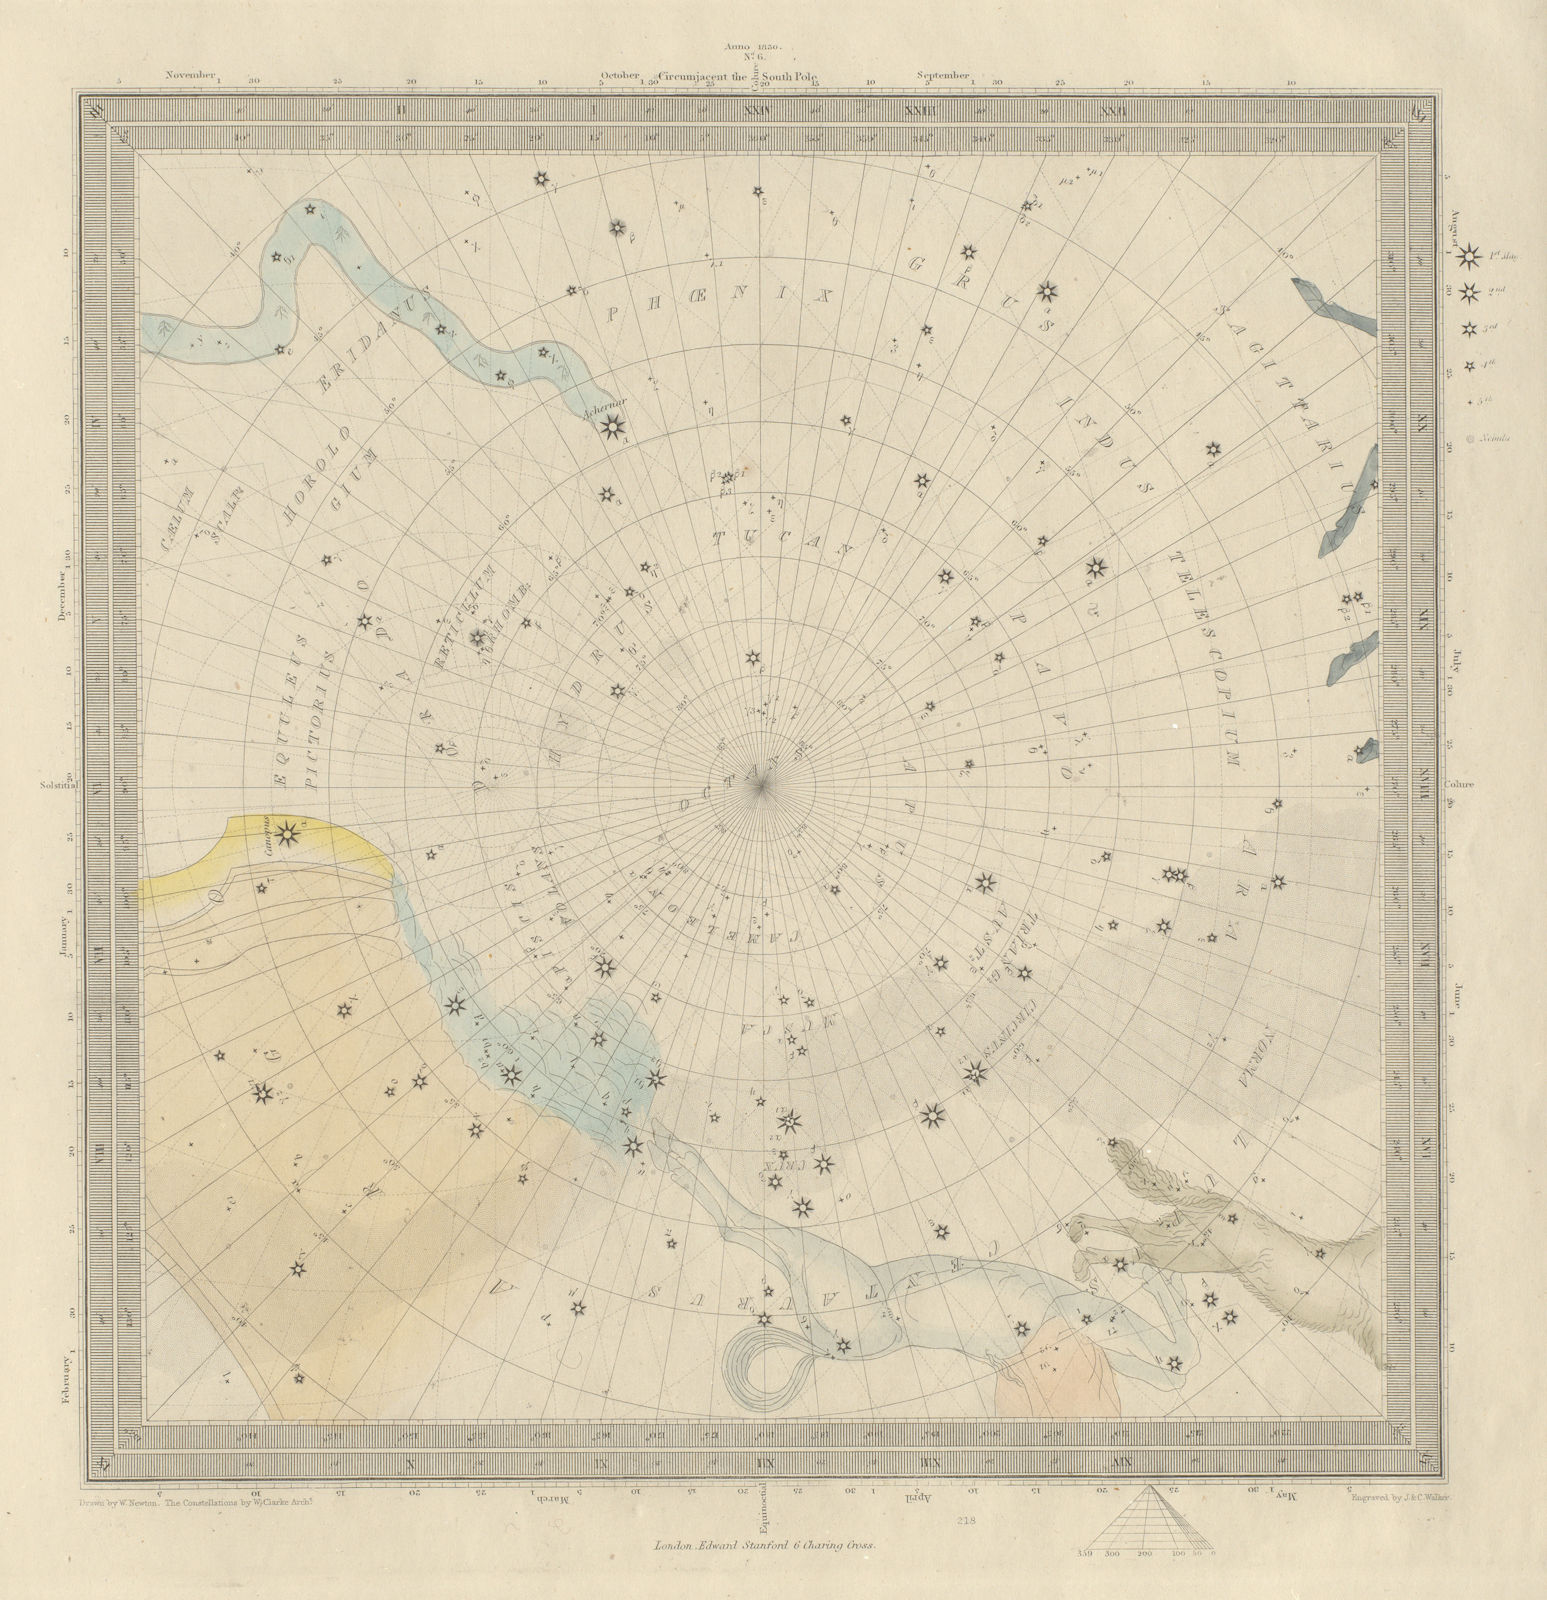 Associate Product ASTRONOMY CELESTIAL Star map chart 6 South Pole. SDUK 1874 old antique